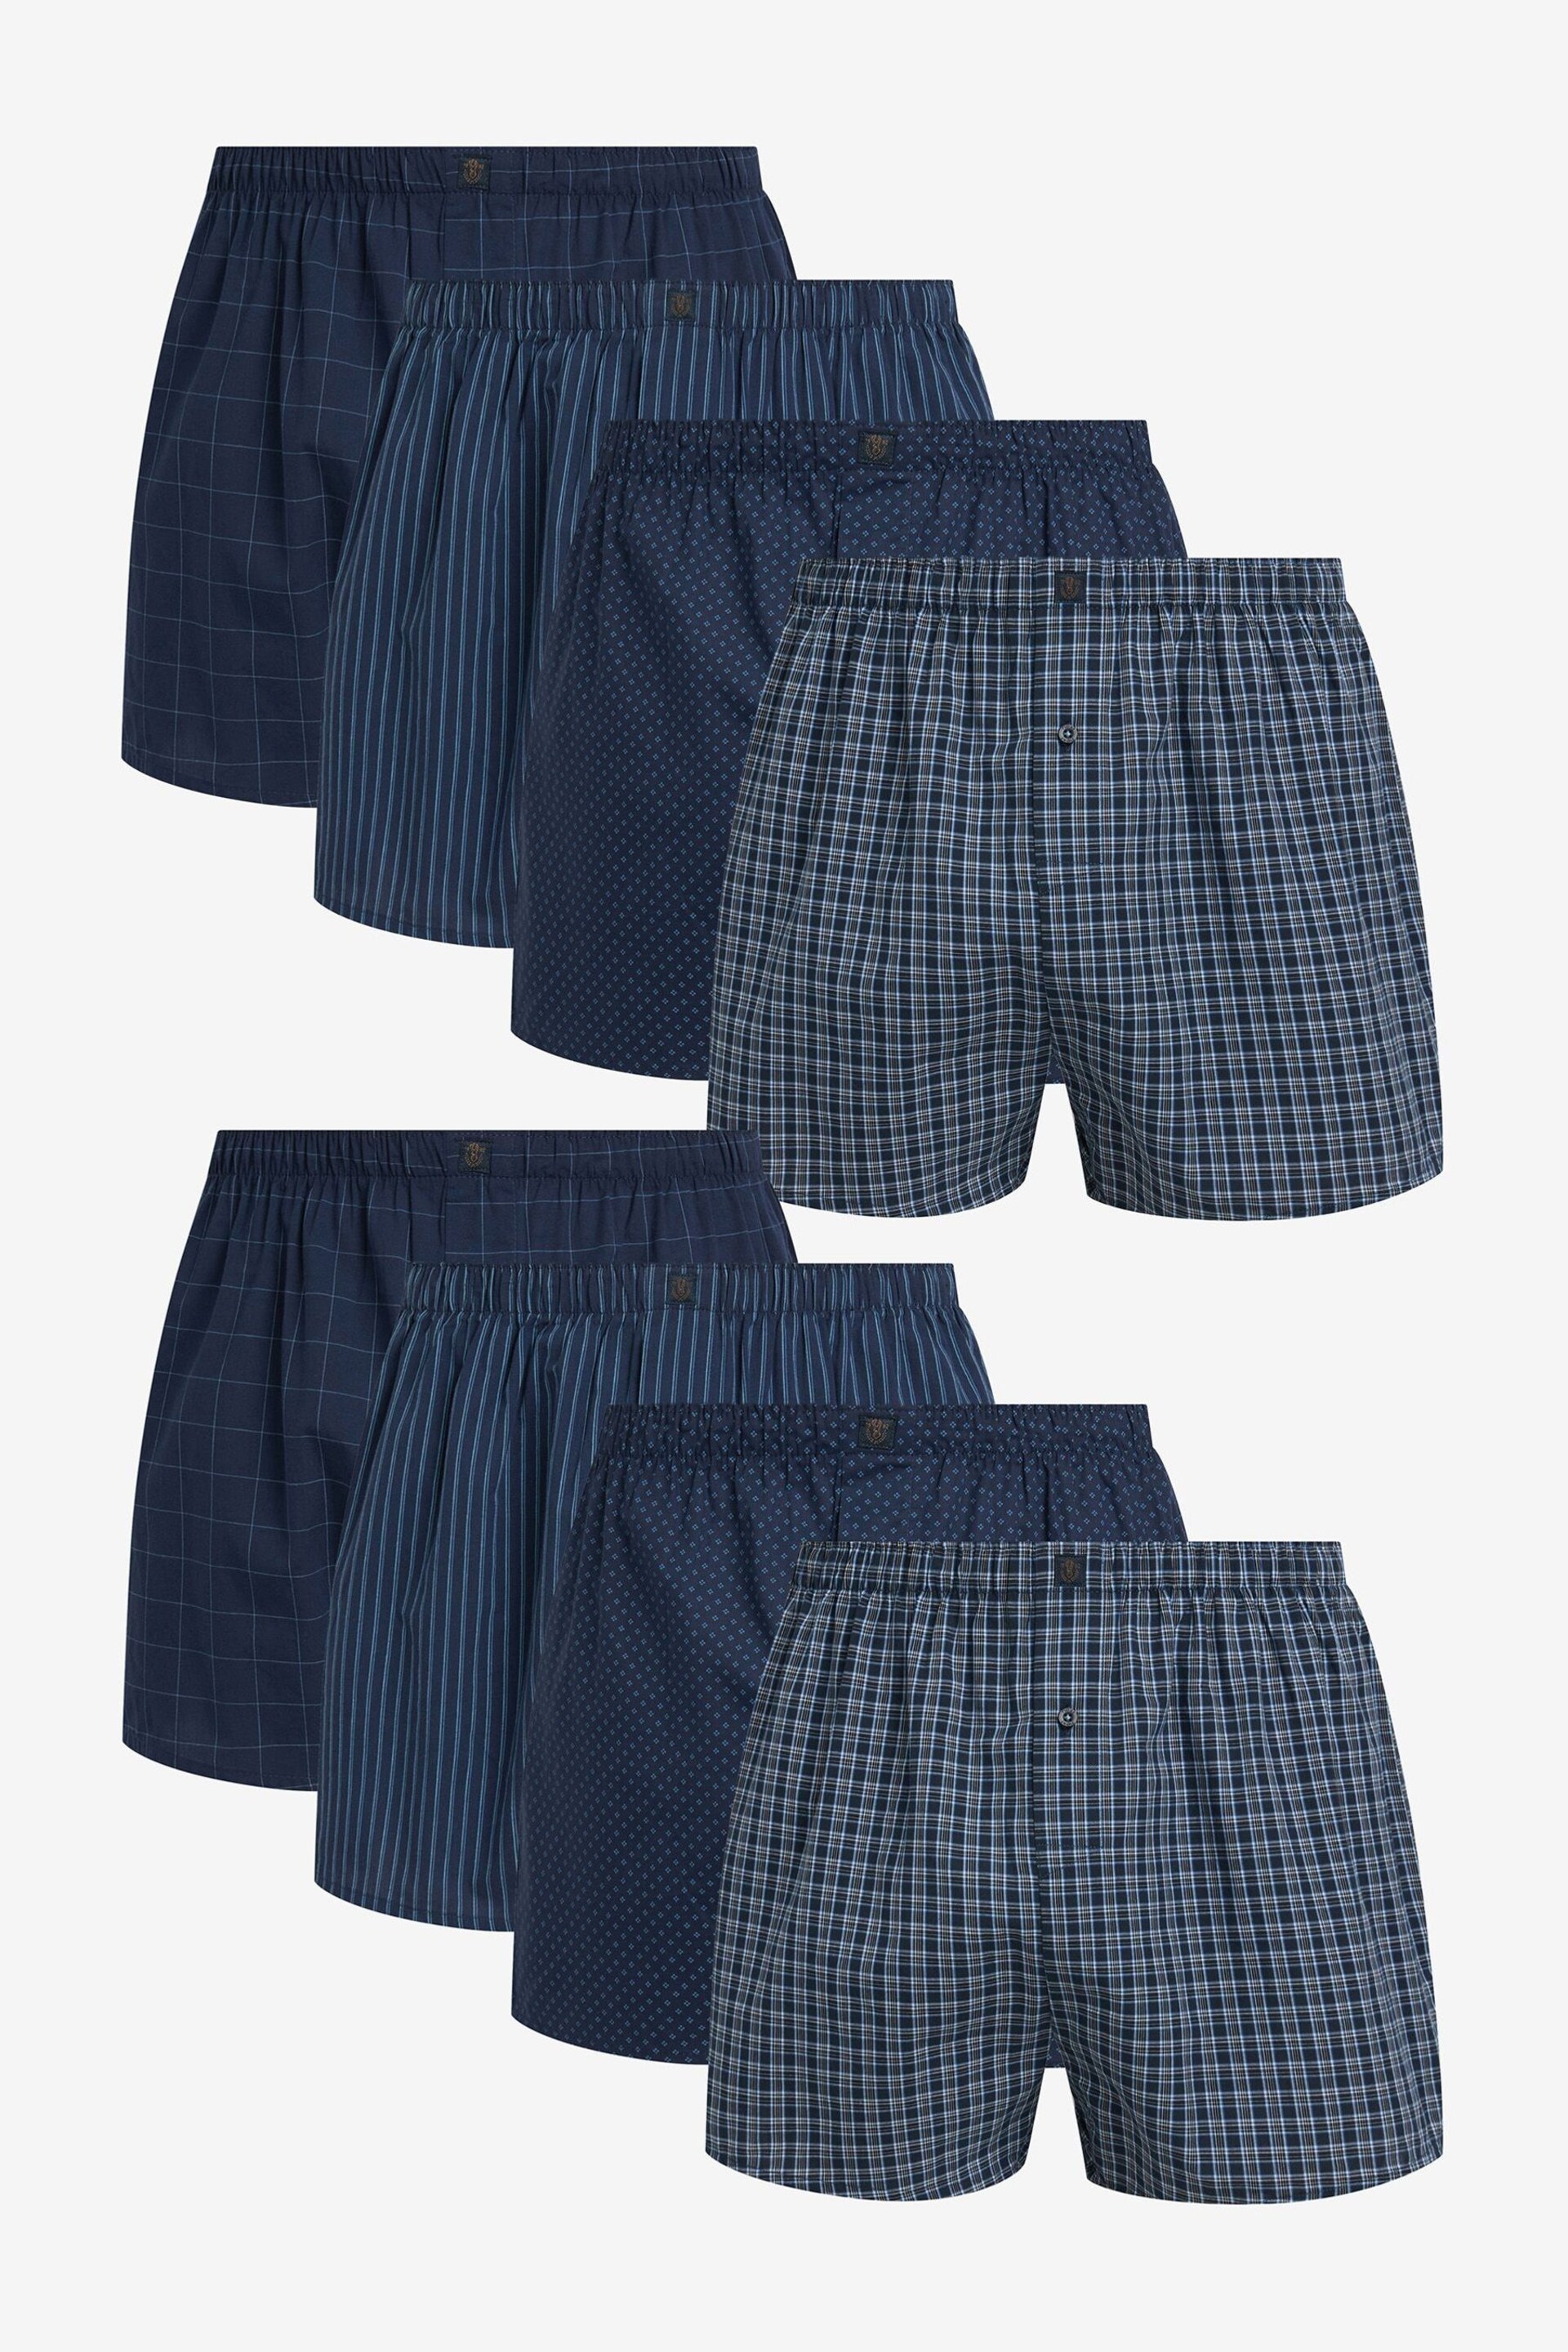 Navy 8 pack Woven Pure Cotton Boxers - Image 1 of 7